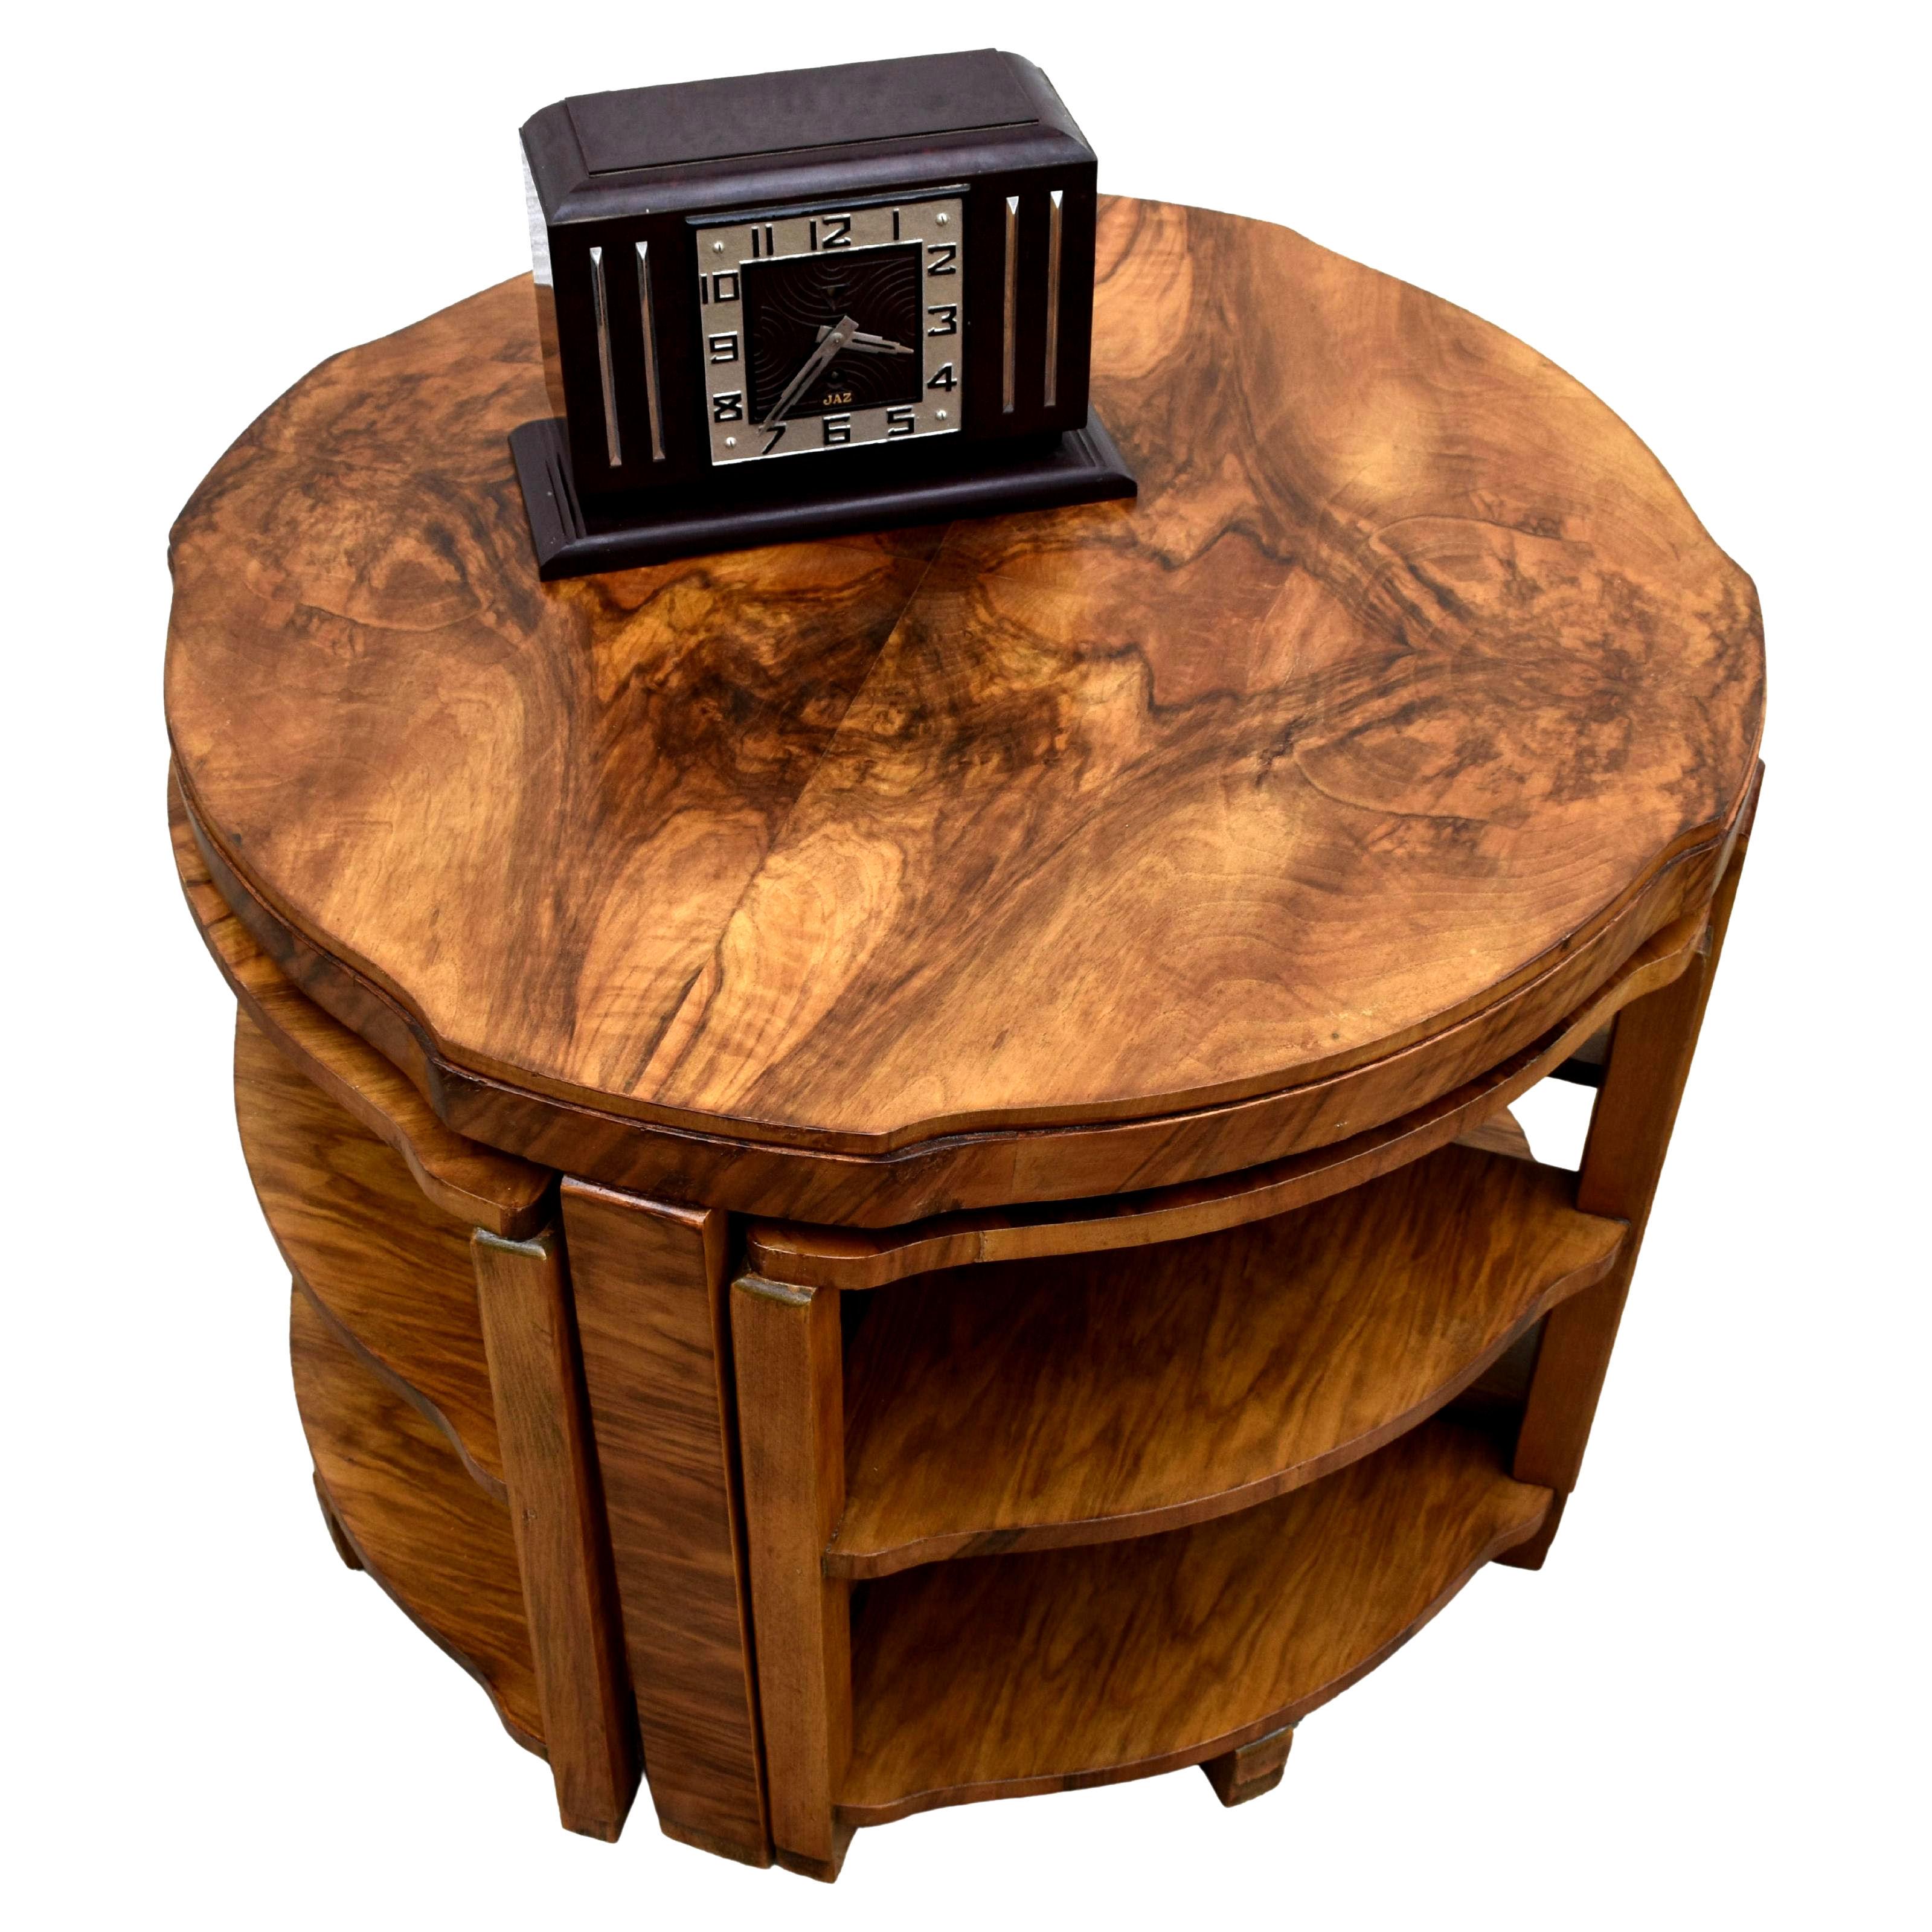 Polished Art Deco High Quality Figured Walnut Quintetto Nest of 5 Tables, English, 1930 For Sale